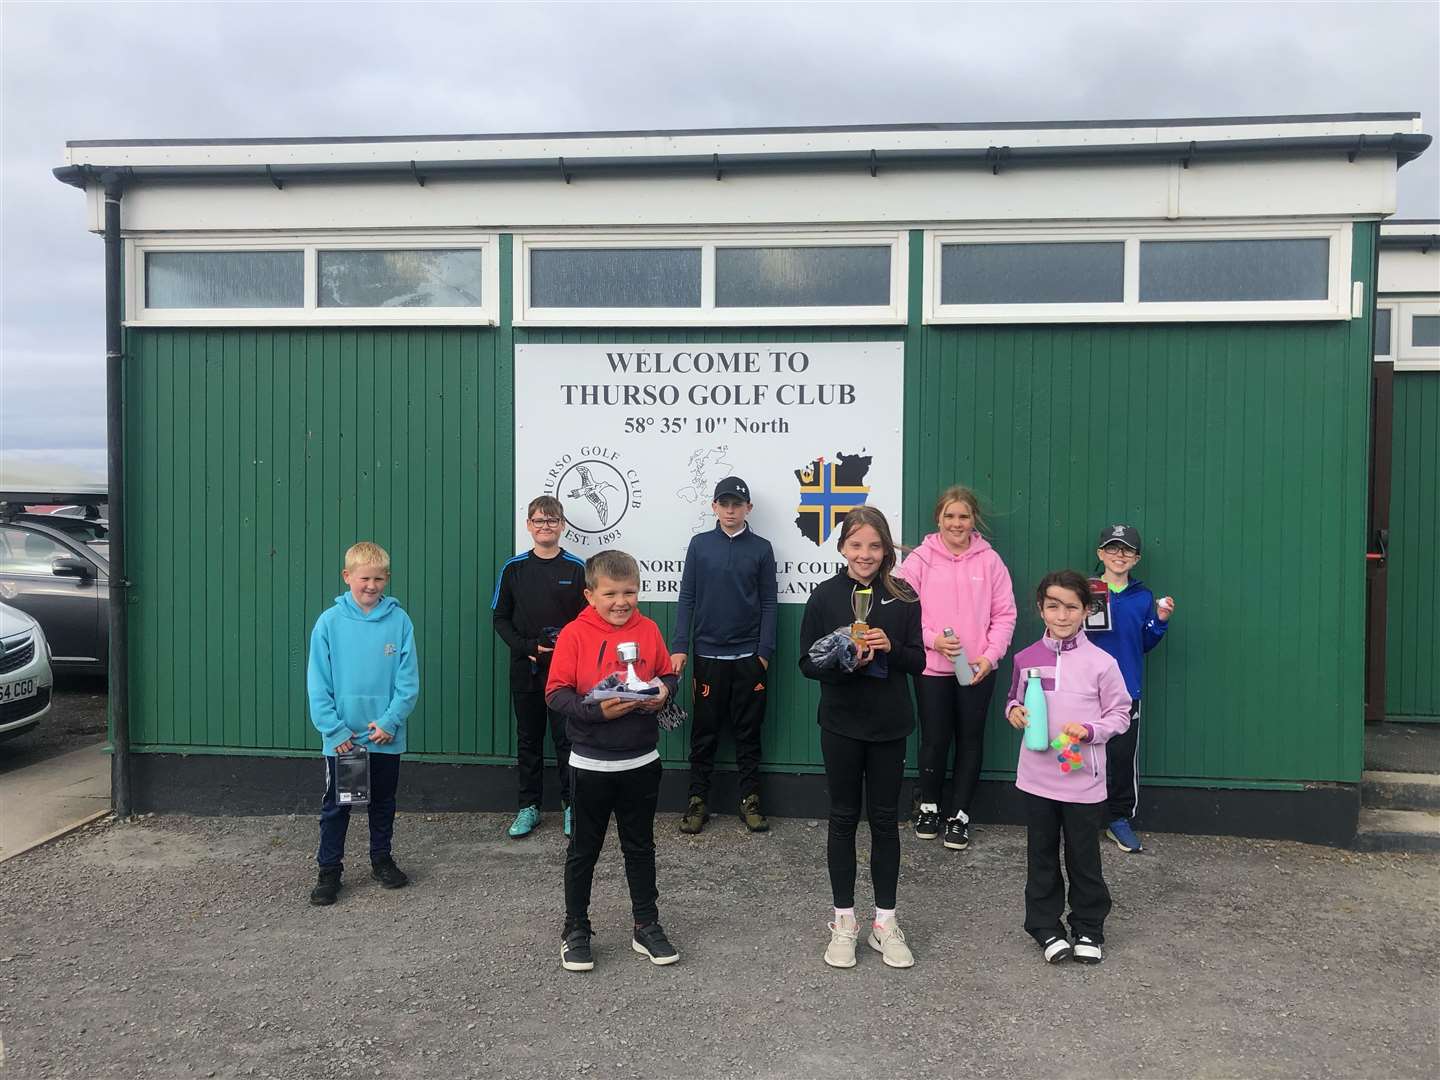 Boys and girls who played in the seven-hole competitions at Thurso.